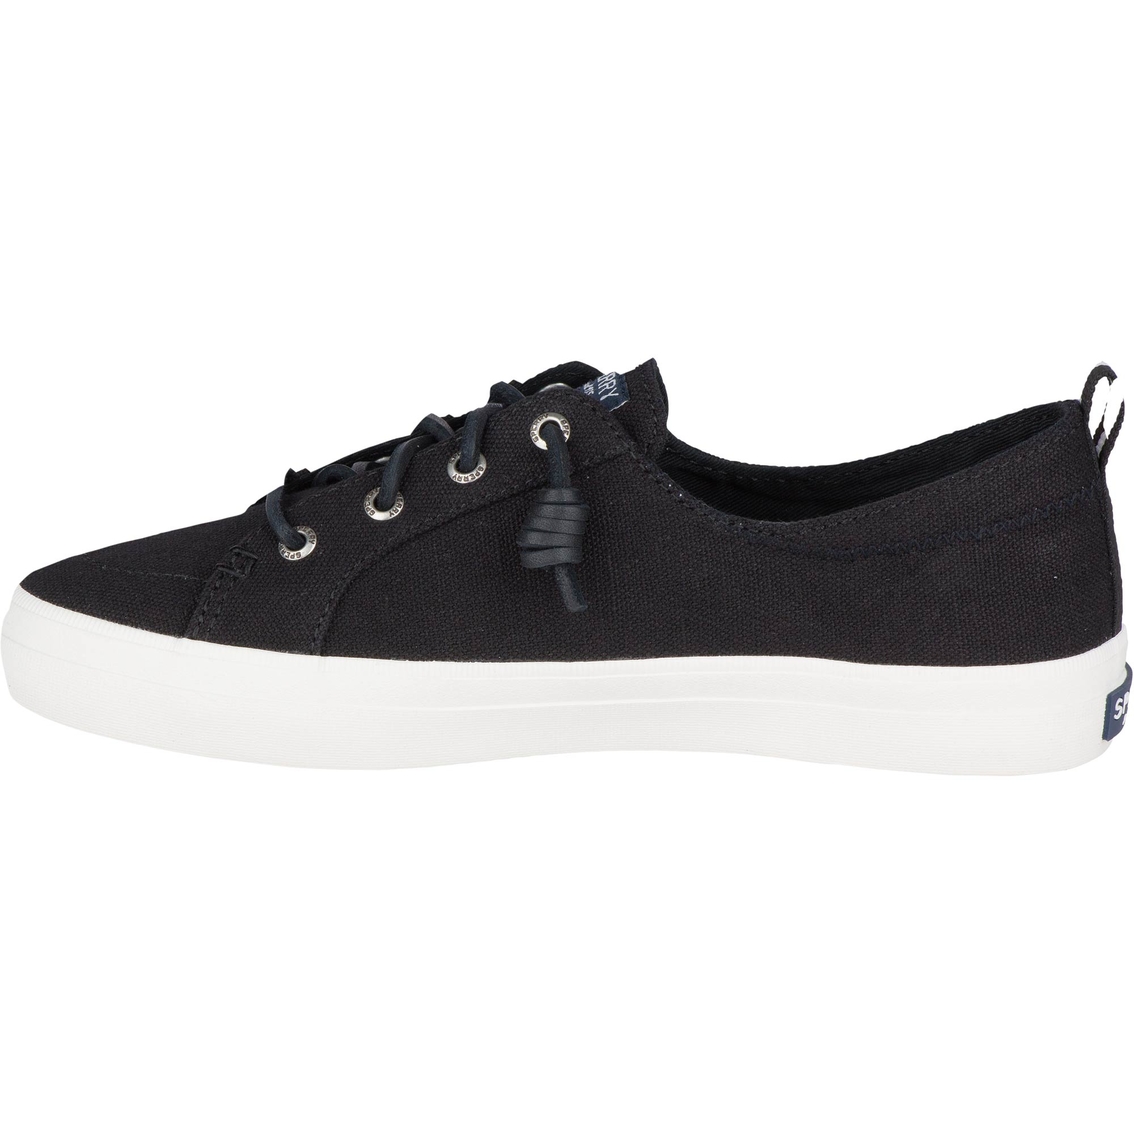 Sperry Women's Crest Vibe Classic Canvas Sneakers - Image 2 of 4